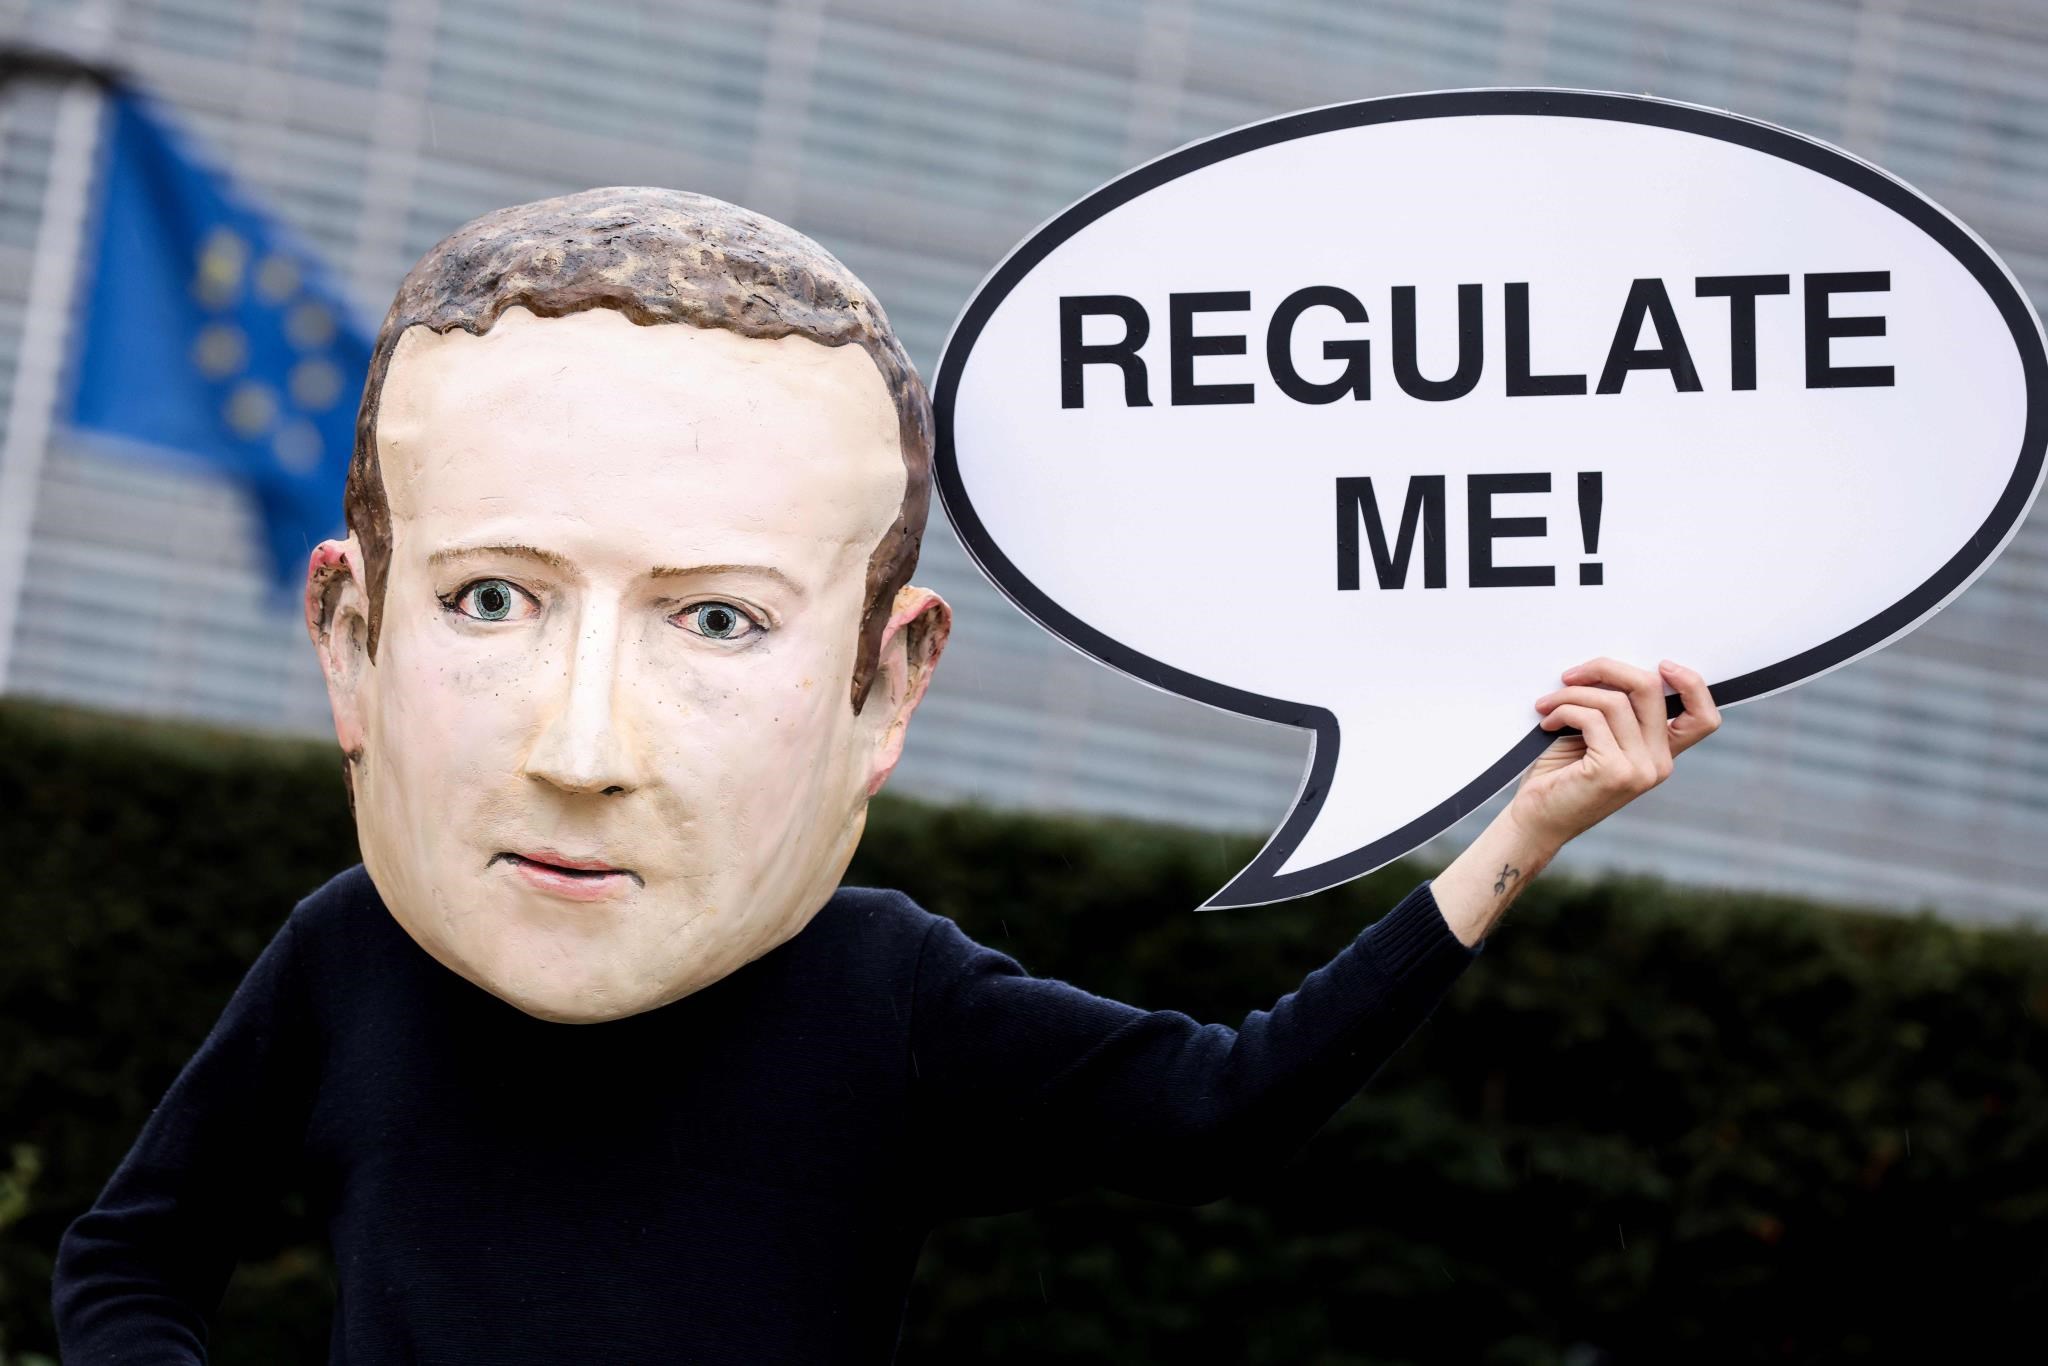 Technology: Ads targeting personal data on Facebook are banned in the European Union